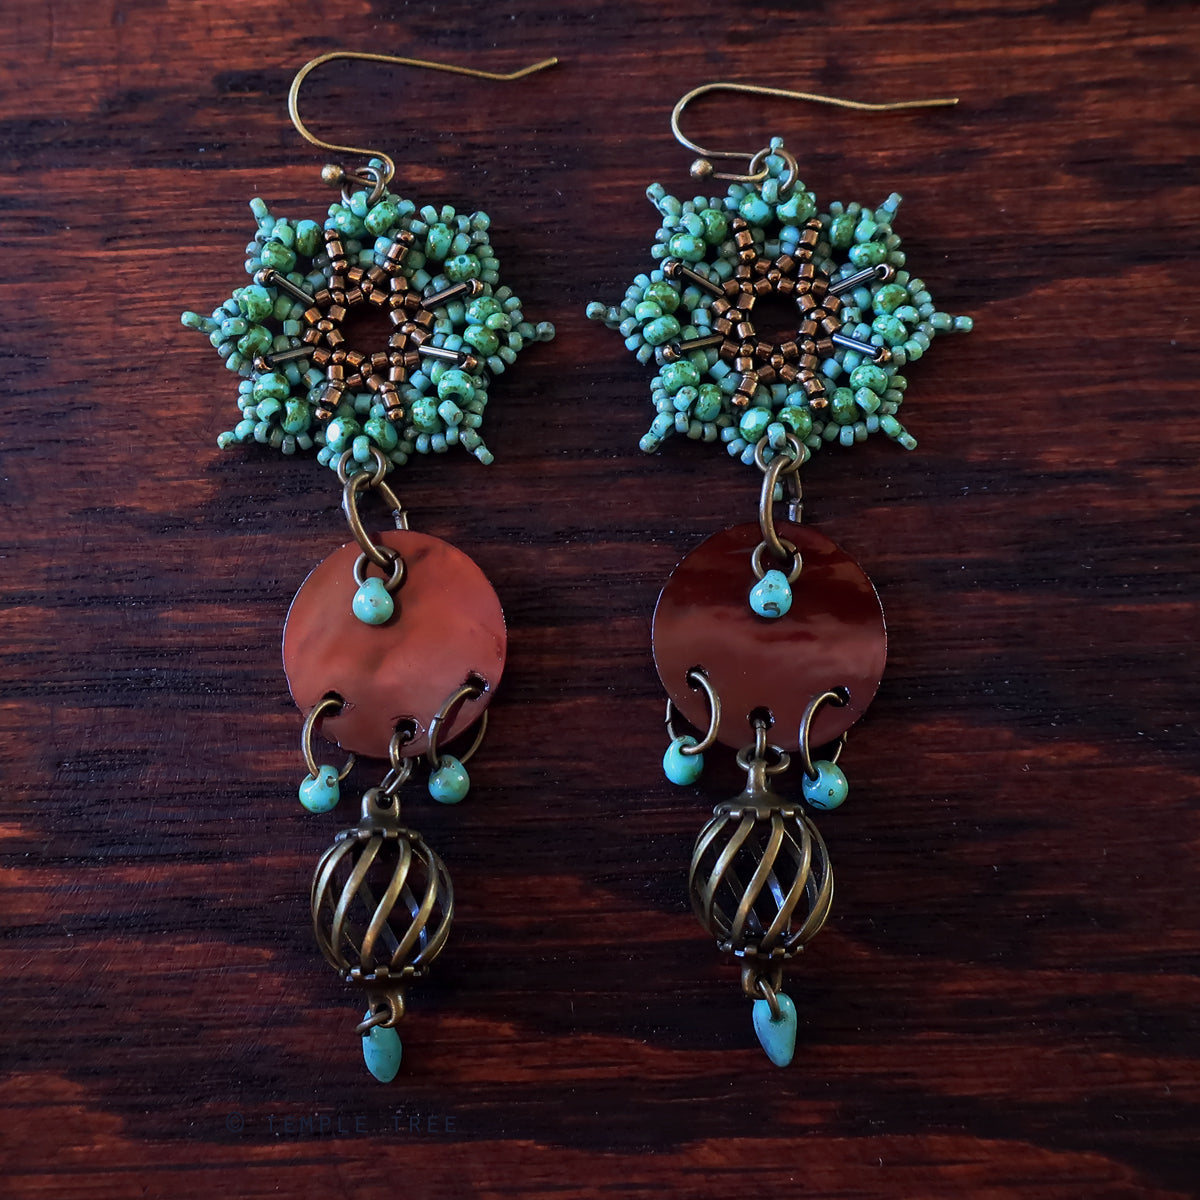 Temple Tree Dharma Wheel Beaded Earrings - Faux Turquoise with Bronze